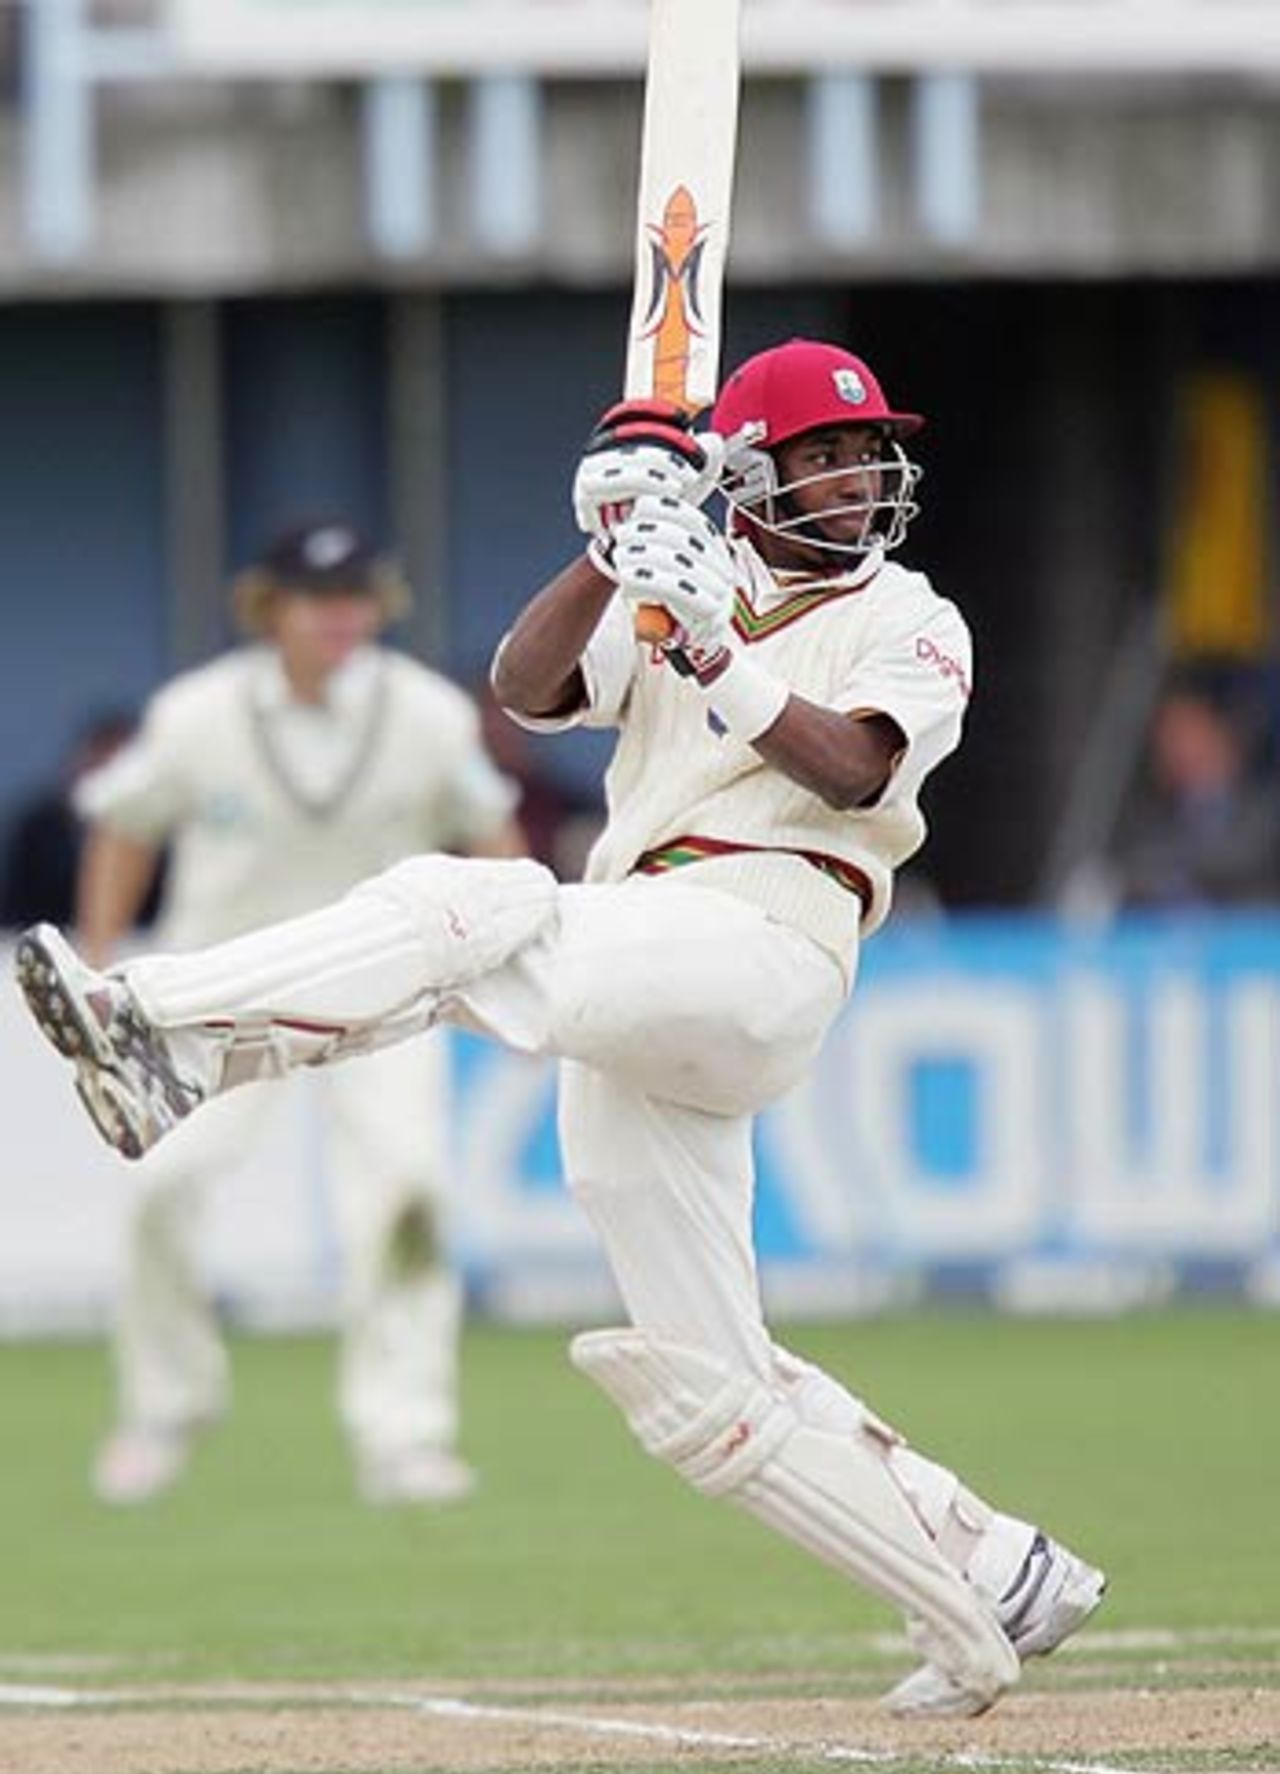 Dwayne Bravo collects a boundary during his unbeaten 22, New Zealand v West Indies, 3rd Test, Napier, 2nd day, March 26, 2006